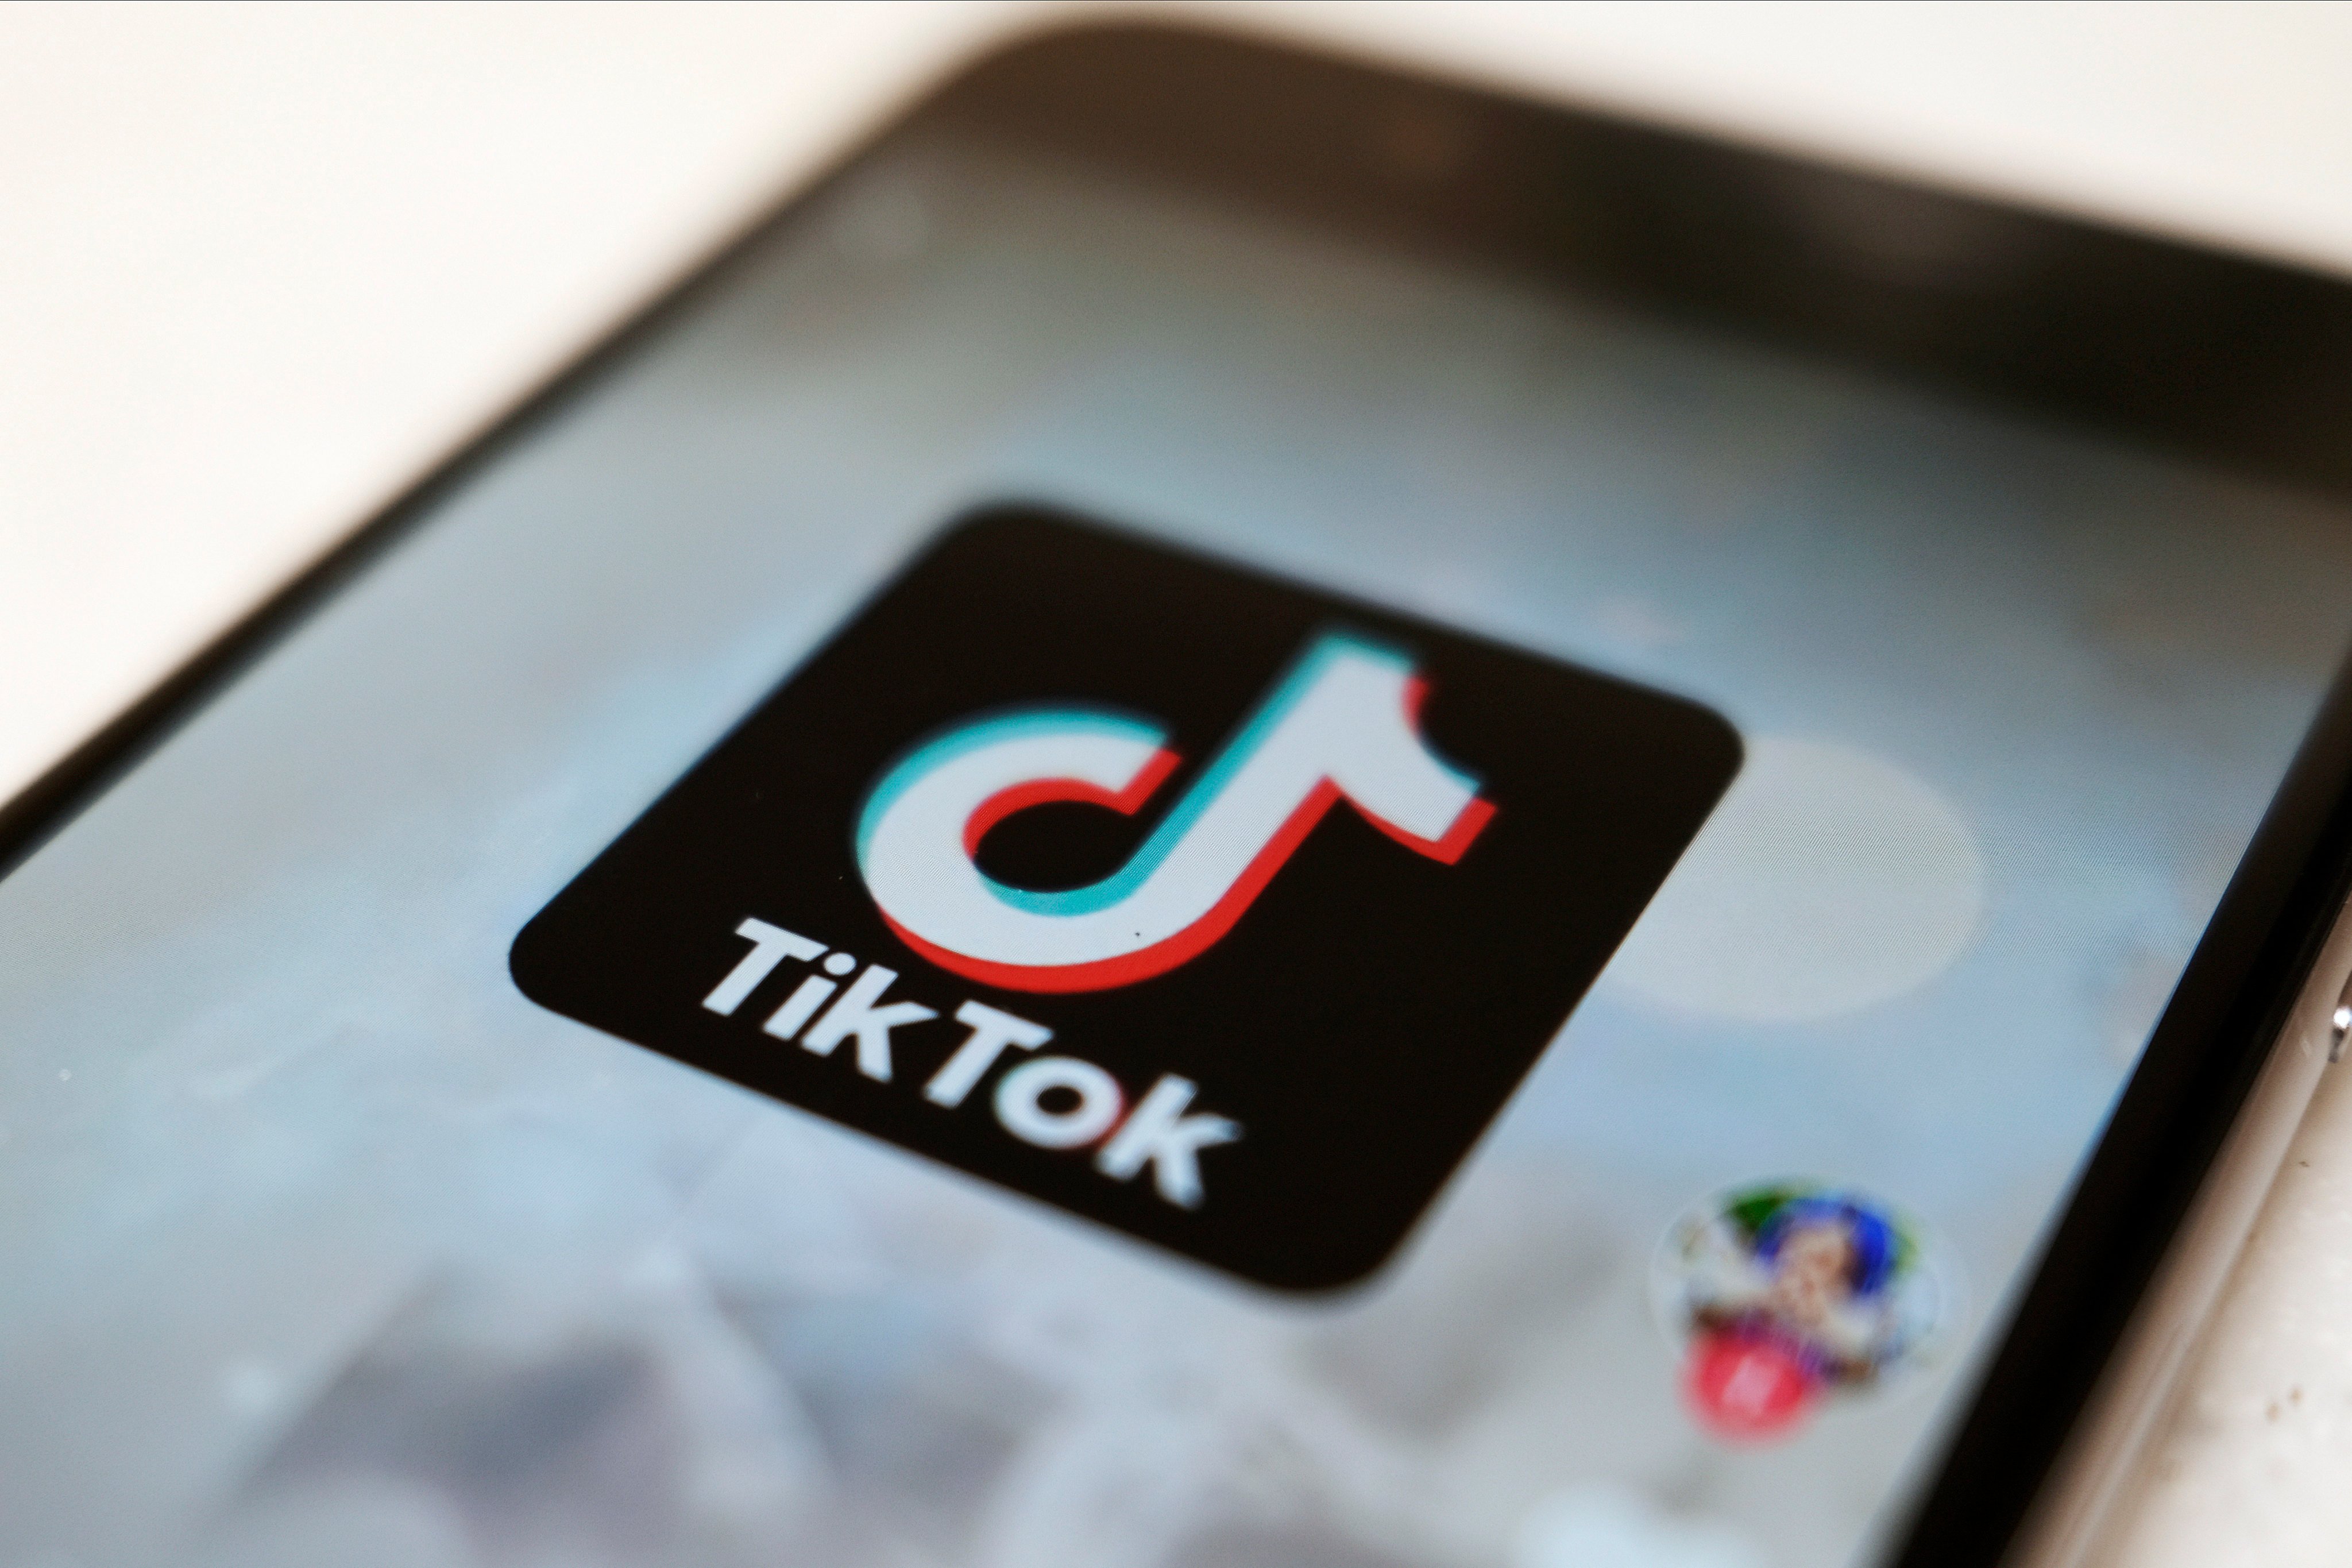 The TikTok logo is displayed on a smartphone screen in Tokyo, Sept. 28, 2020. Photo: AP